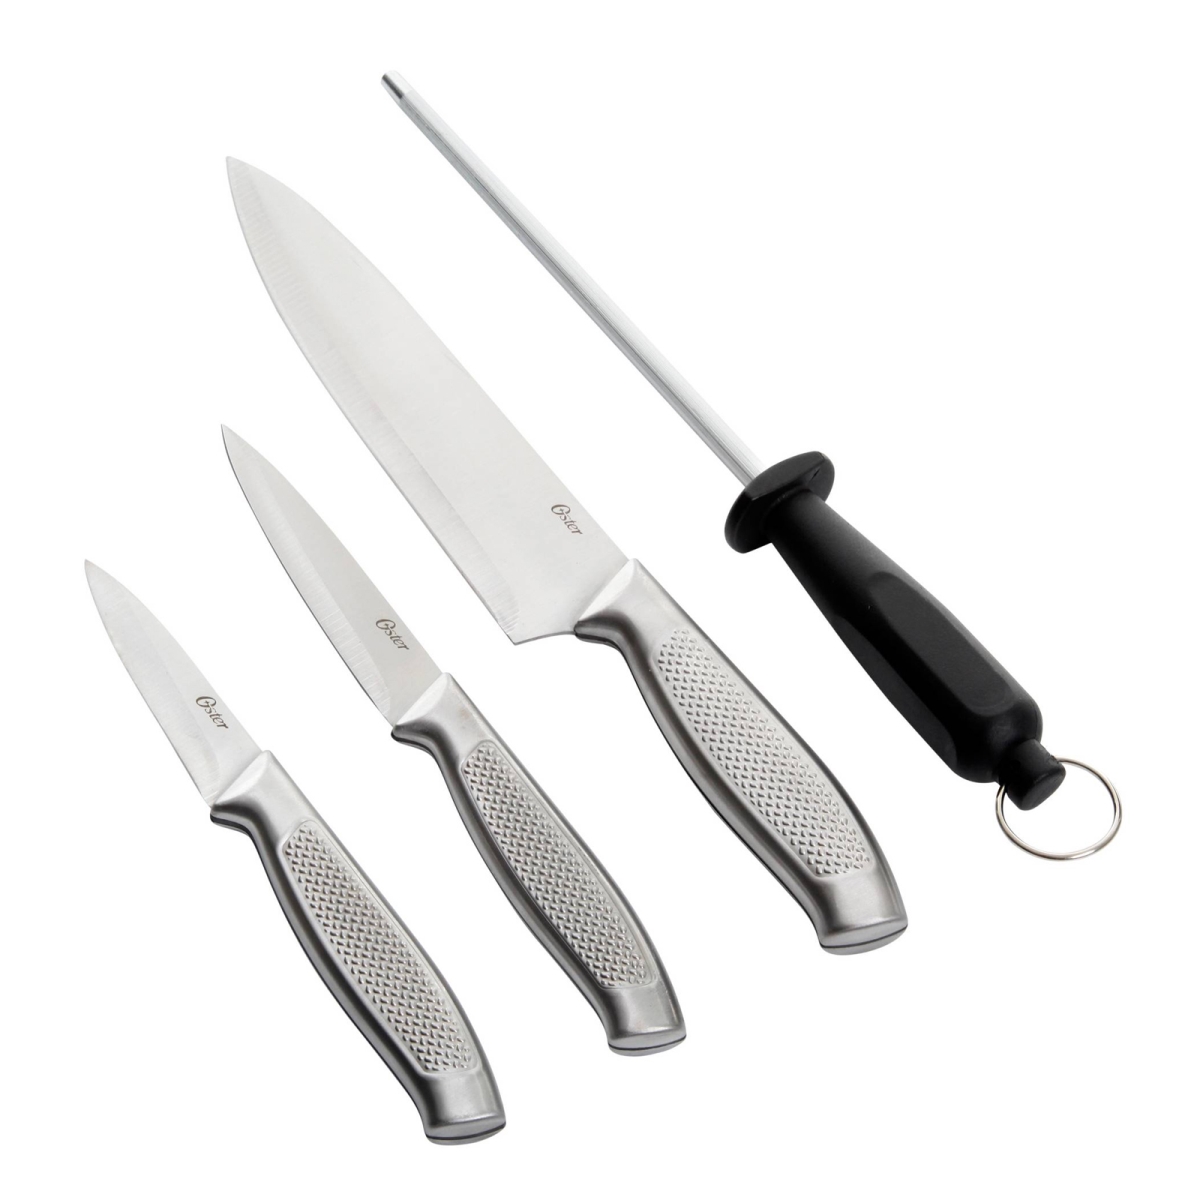 Picture of Oster 111914.04 Edgefield Stainless Steel Cutlery Set - 4 Piece